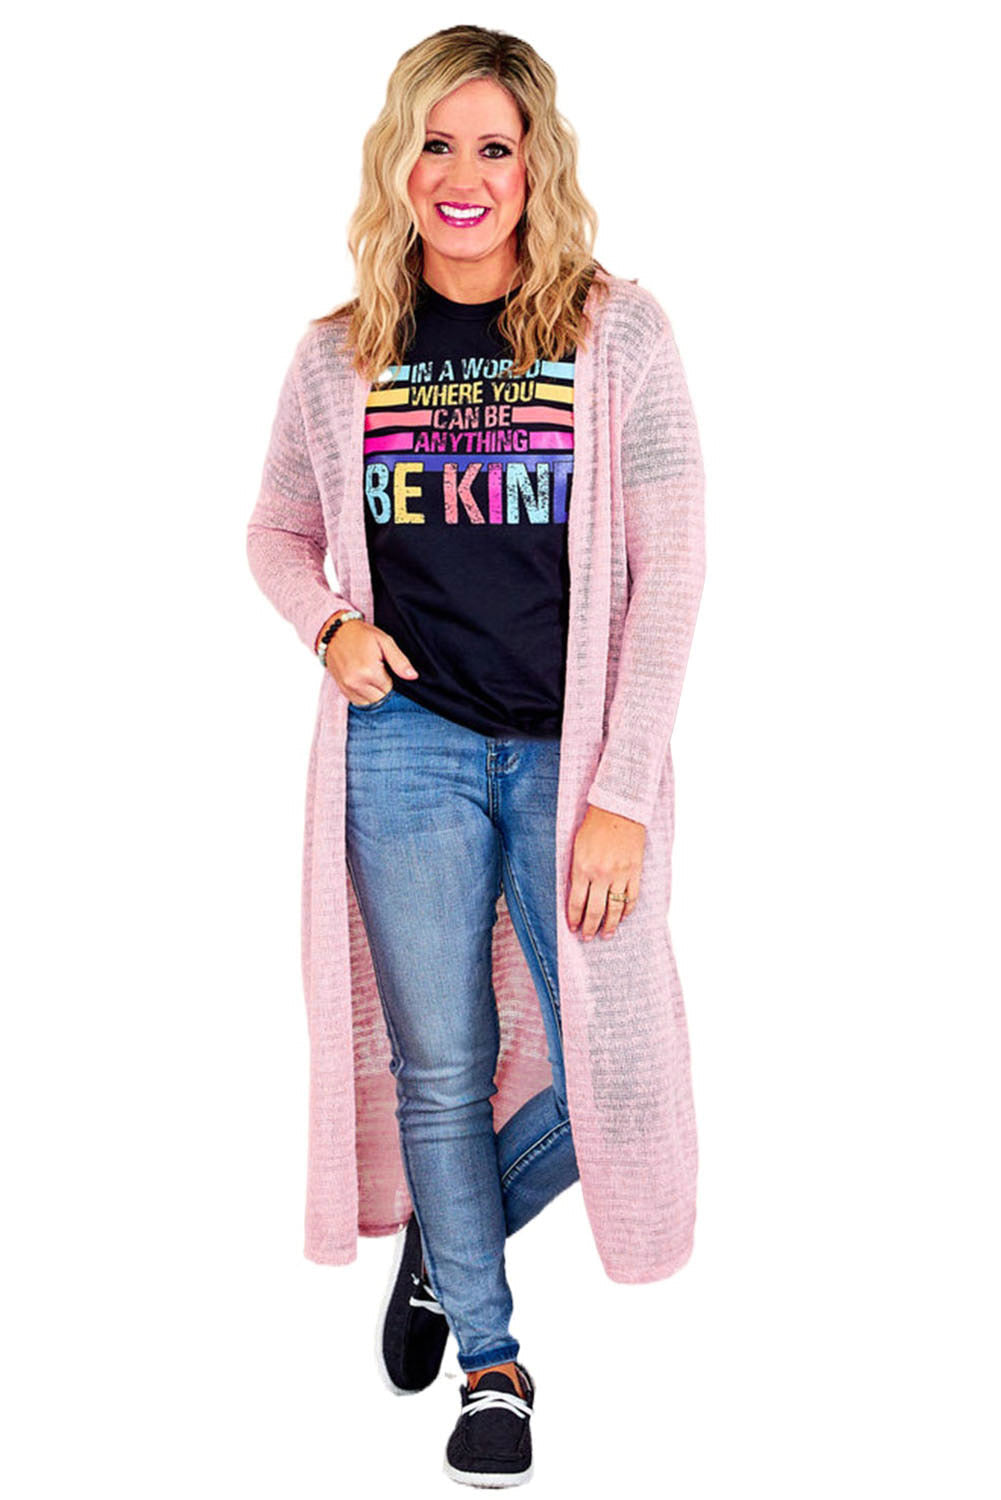 Pink Sheer Knitted Long Side Slit Plus Size Cardigan